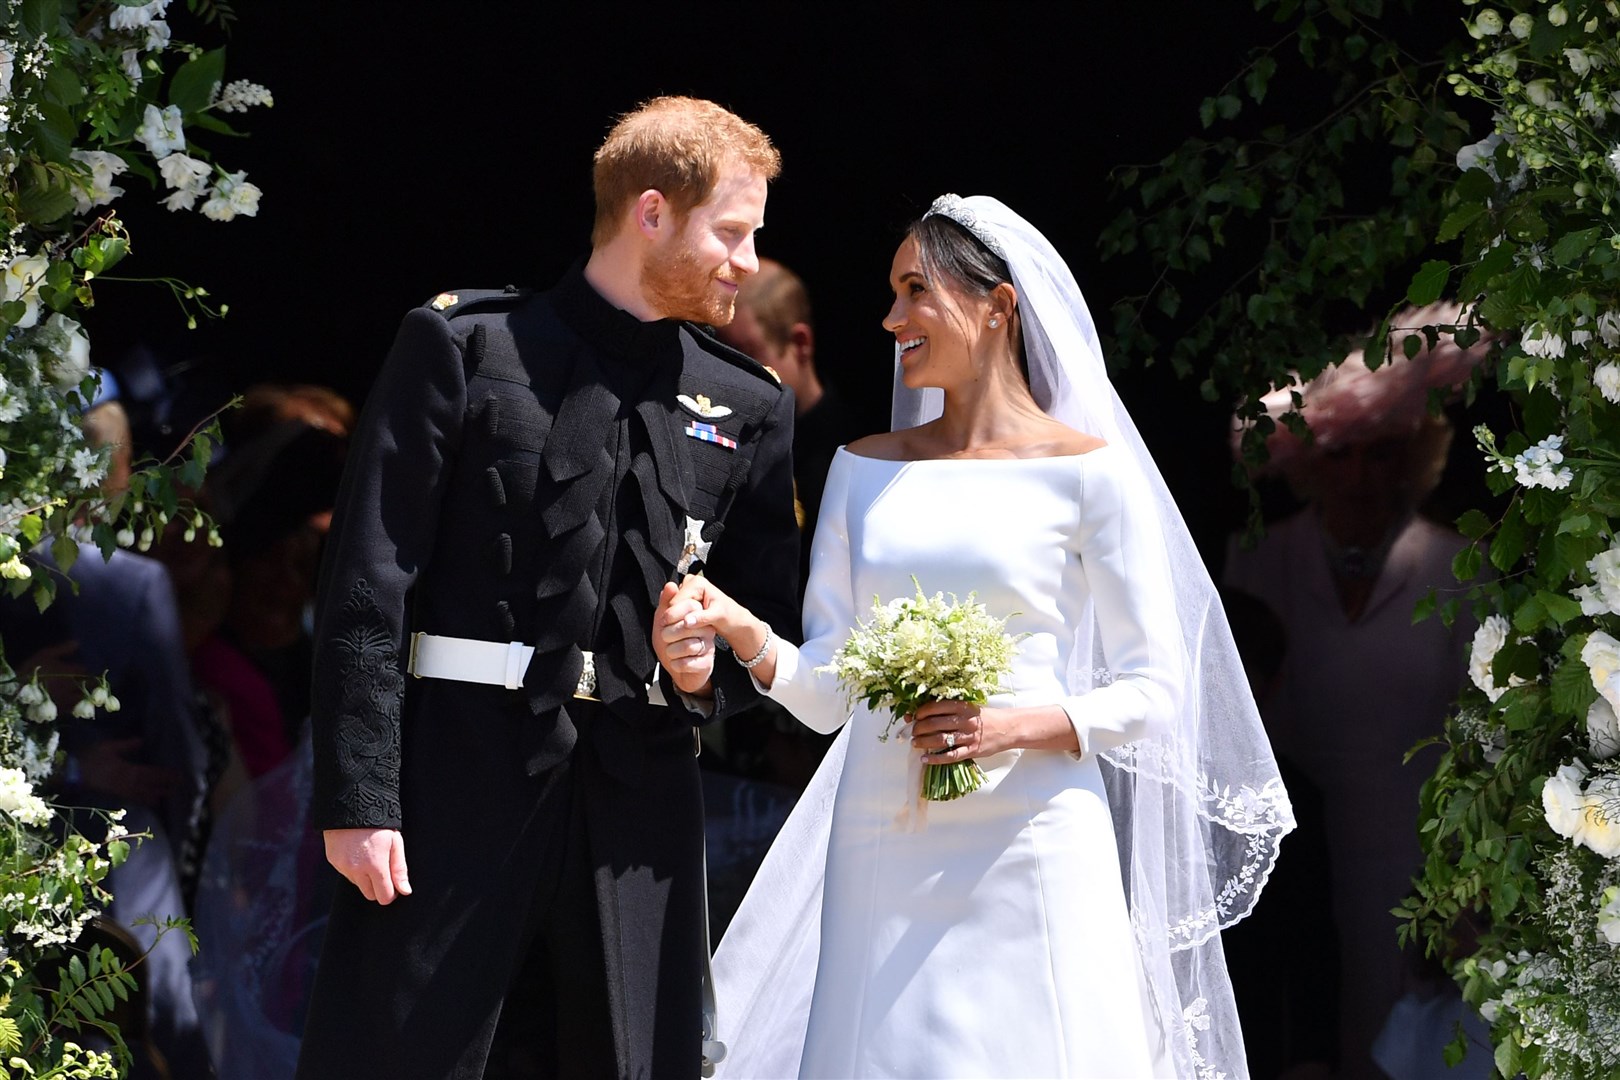 Andrew Marr expressed his sadness at the Duke and Duchess of Sussex’s decision to step down as working royals (Ben Stansall/PA)